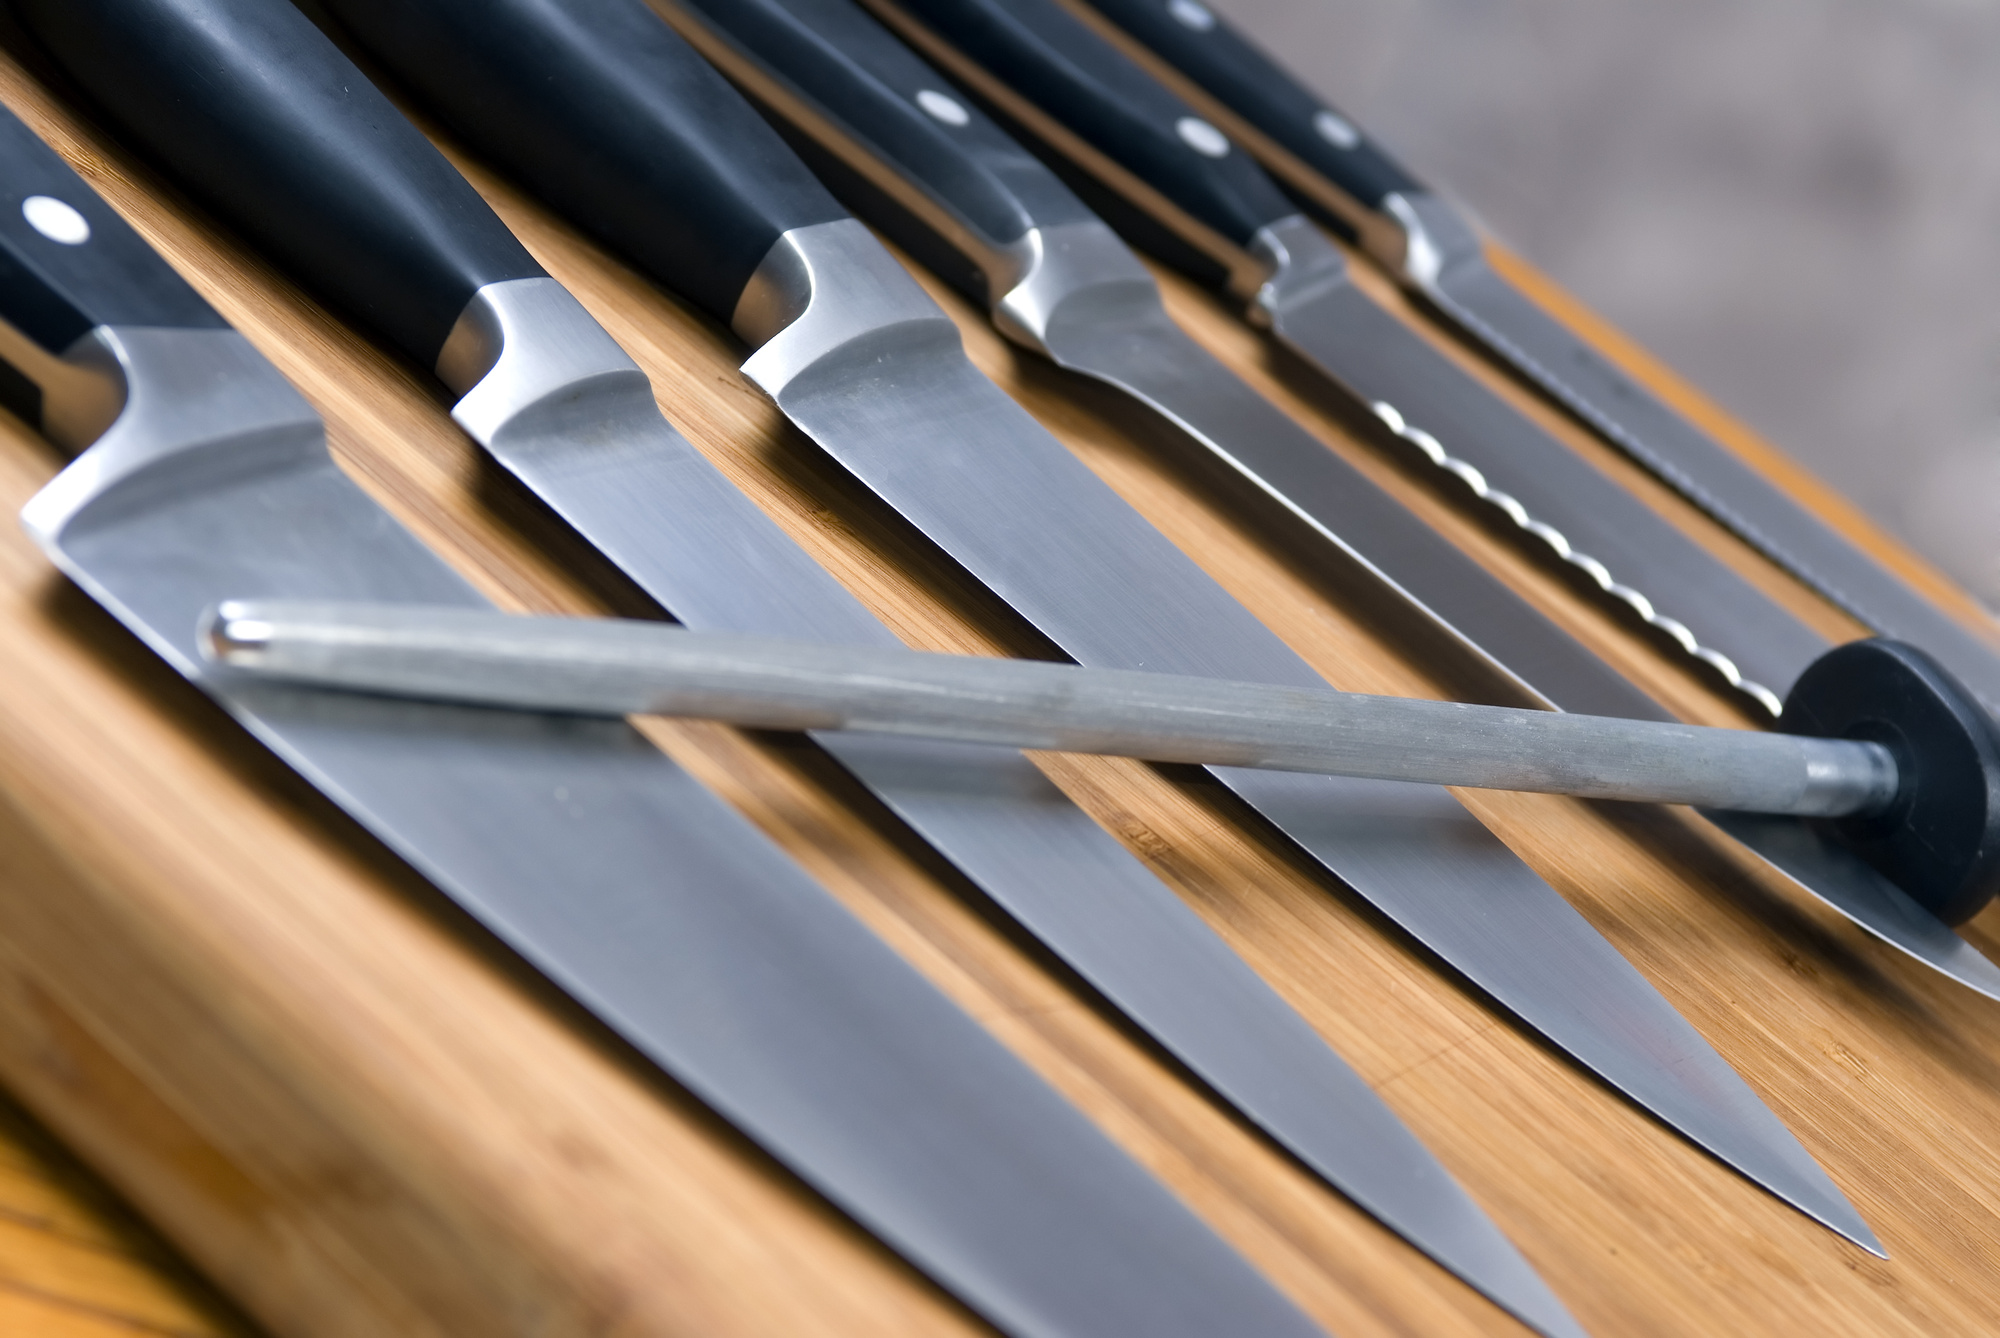 What Are the Different Types of Kitchen Knives That Exist Today?